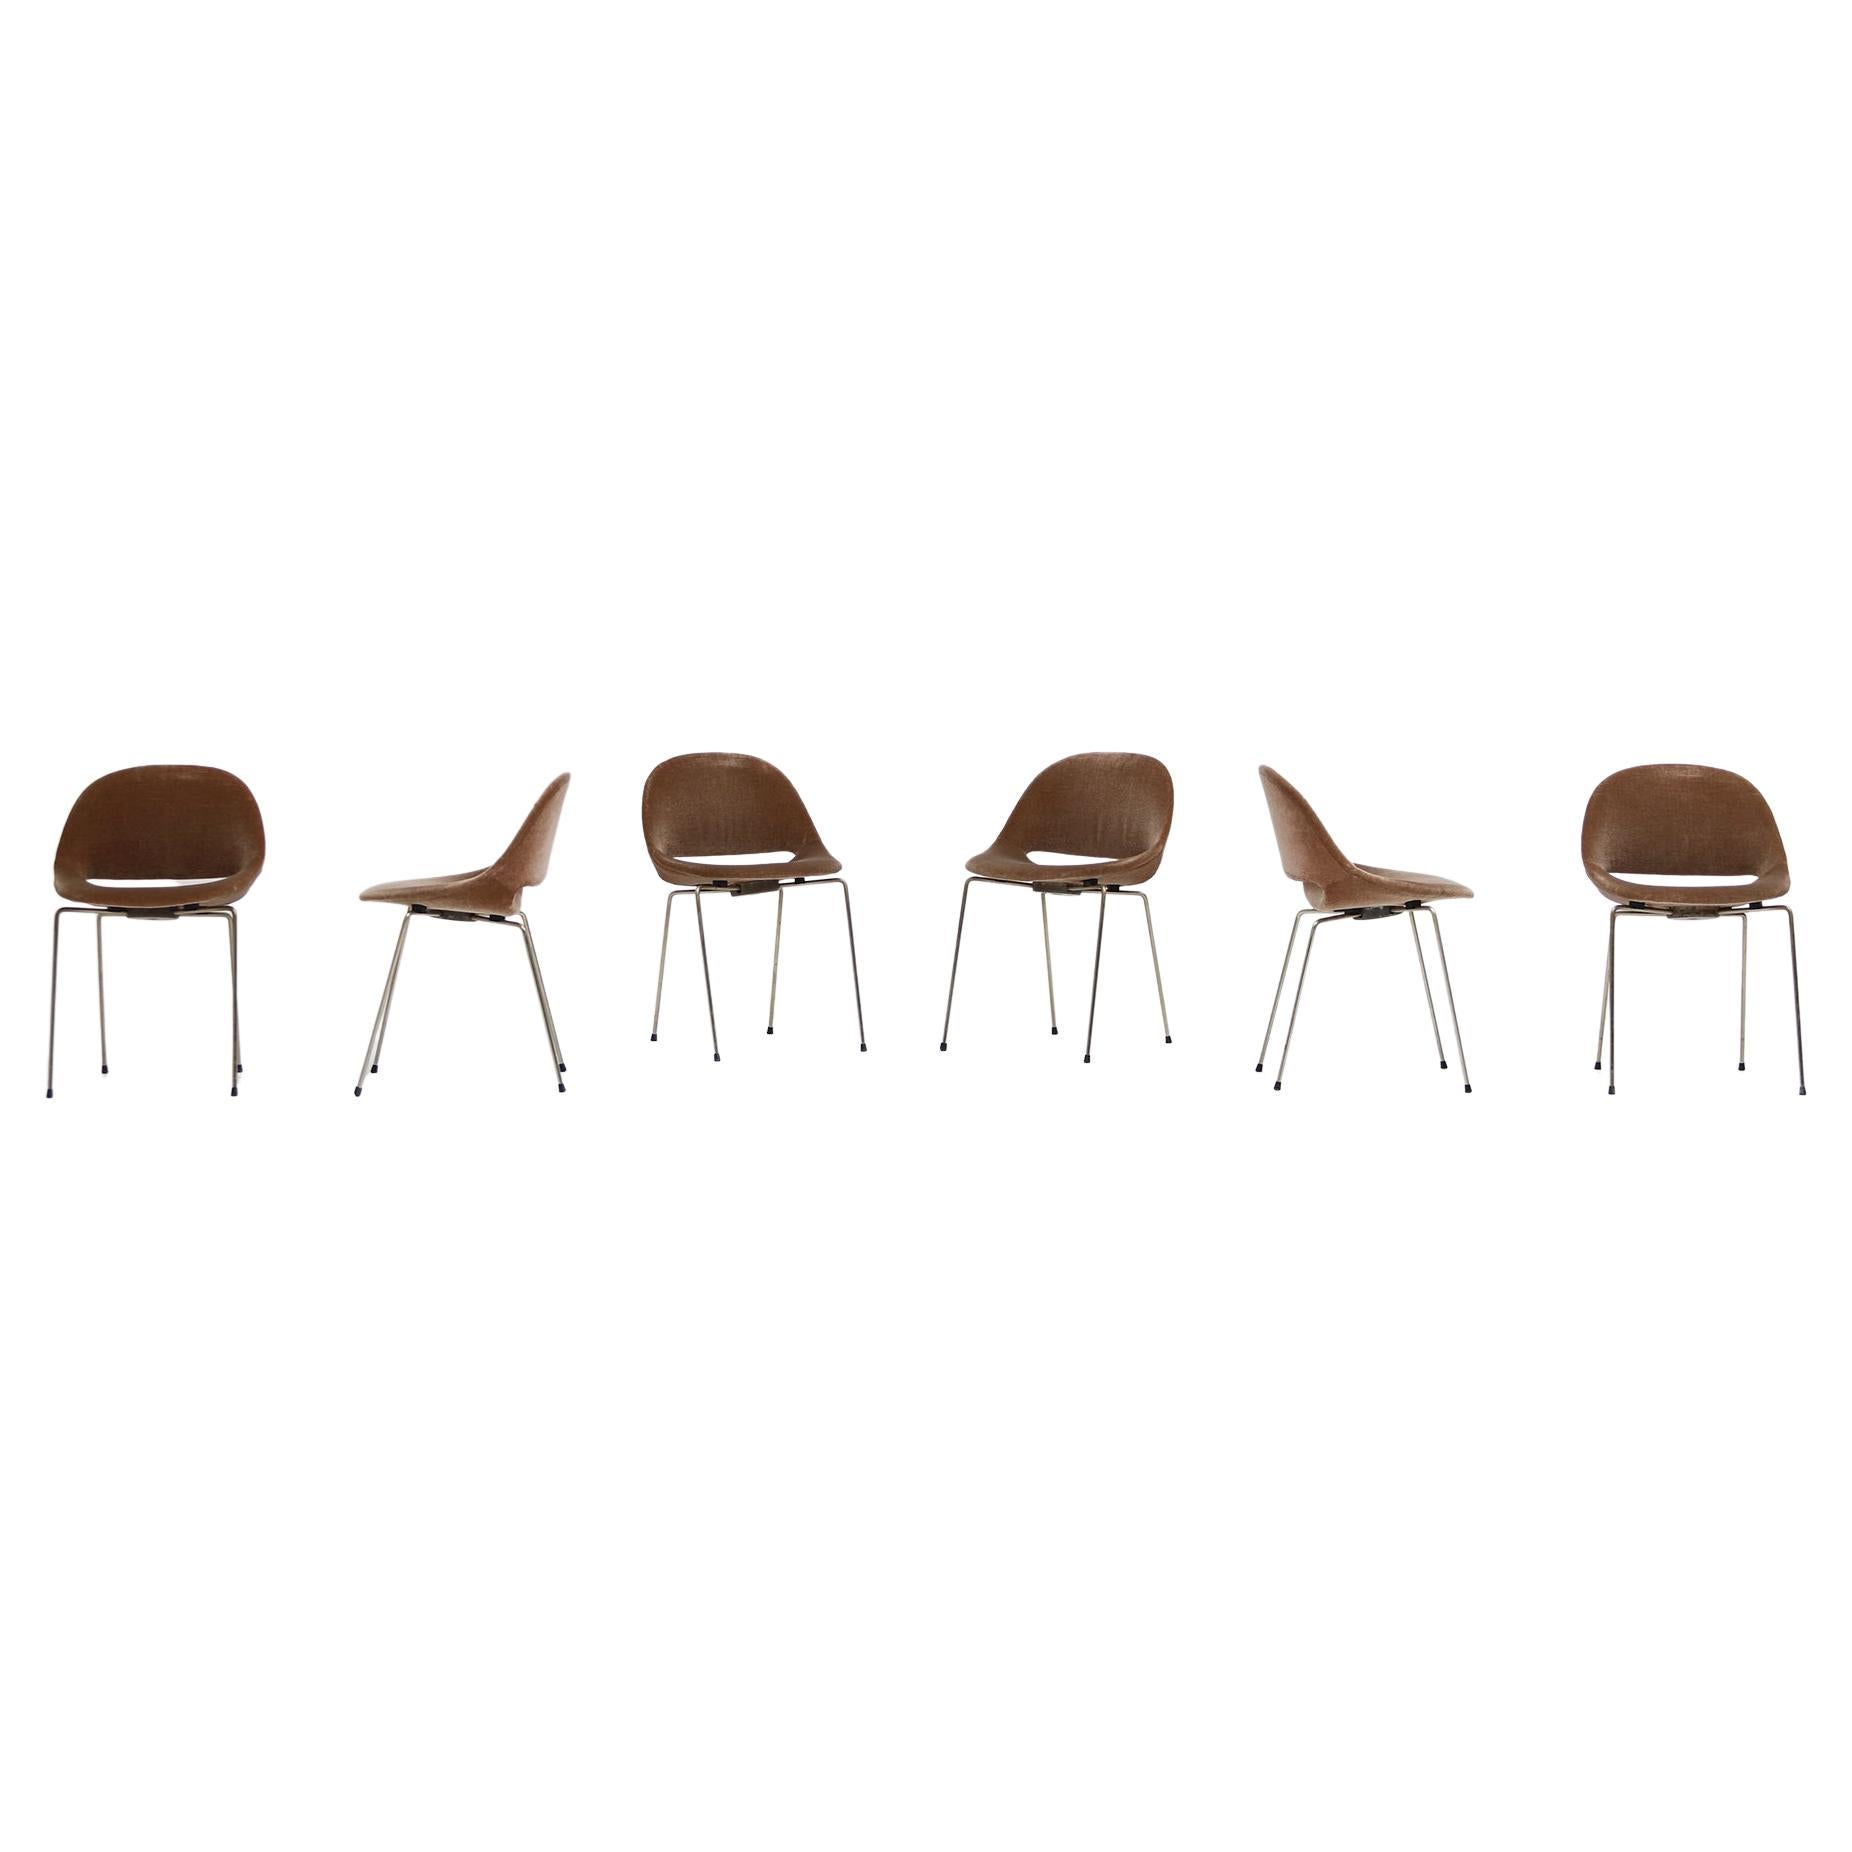 Set of 6 SL58 Dining Chairs by Léon Stynen, 1950s For Sale